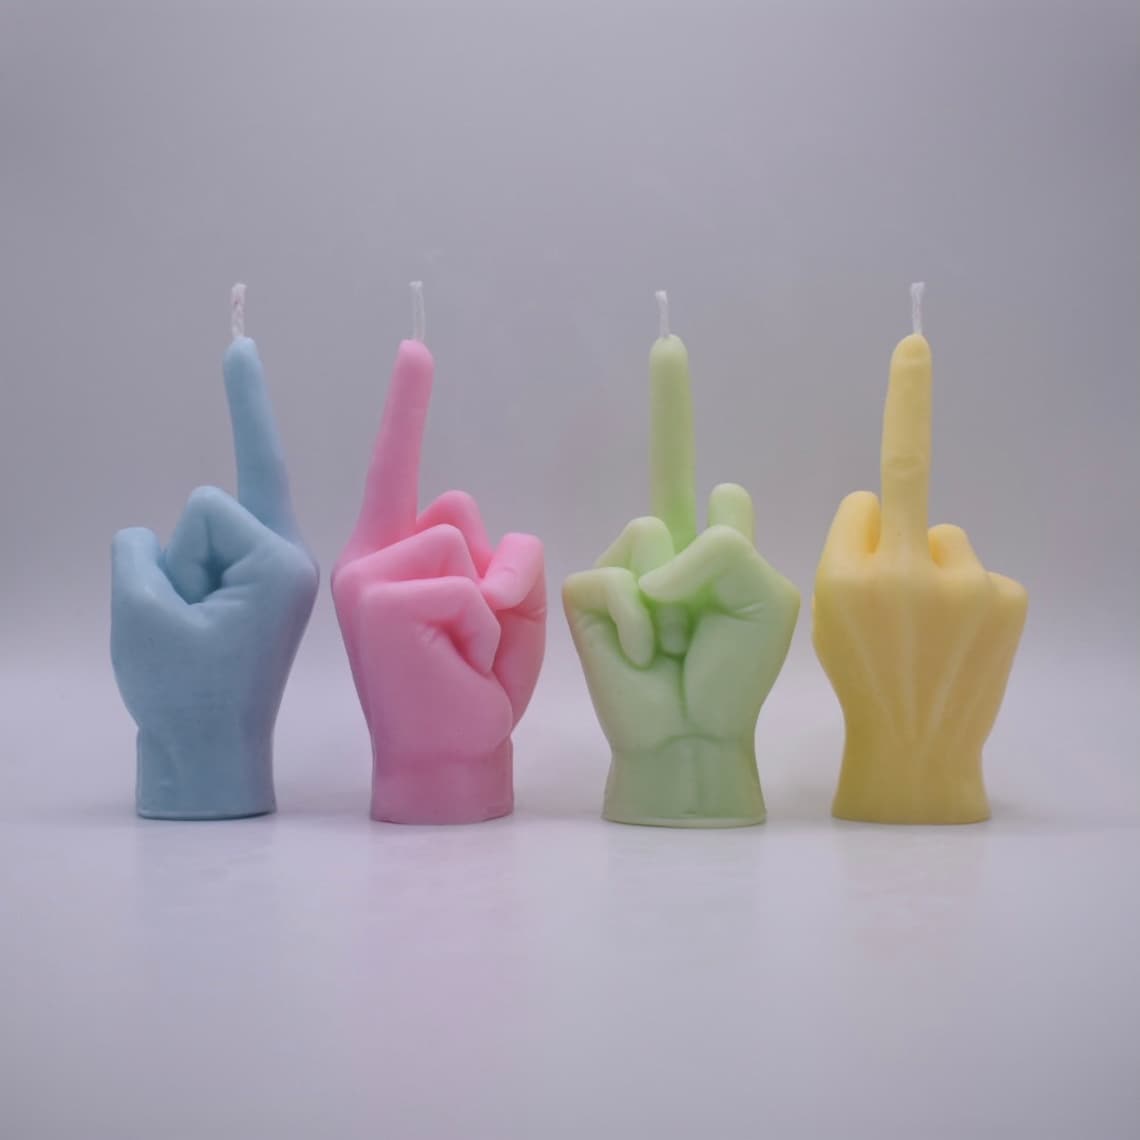 funny middle finger cradle gift idea for friendship day